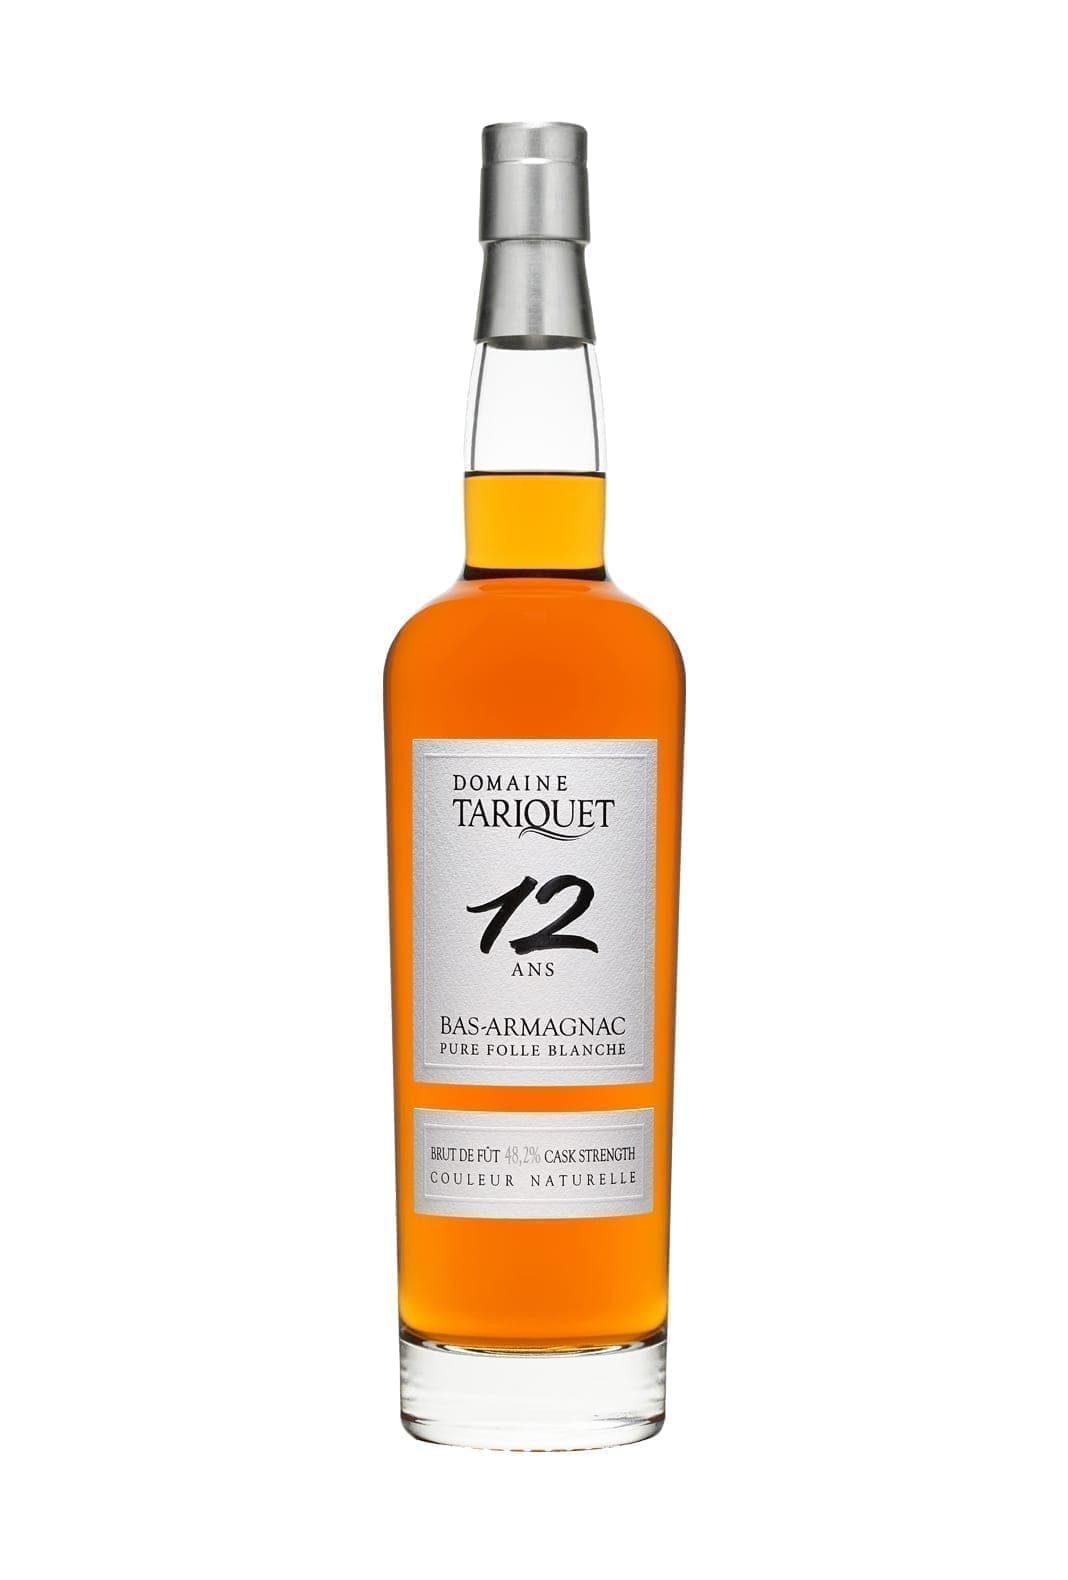 Domaine Tariquet Bas Armagnac Folle Blanche 12 years 48.5% 700ml | Brandy | Shop online at Spirits of France